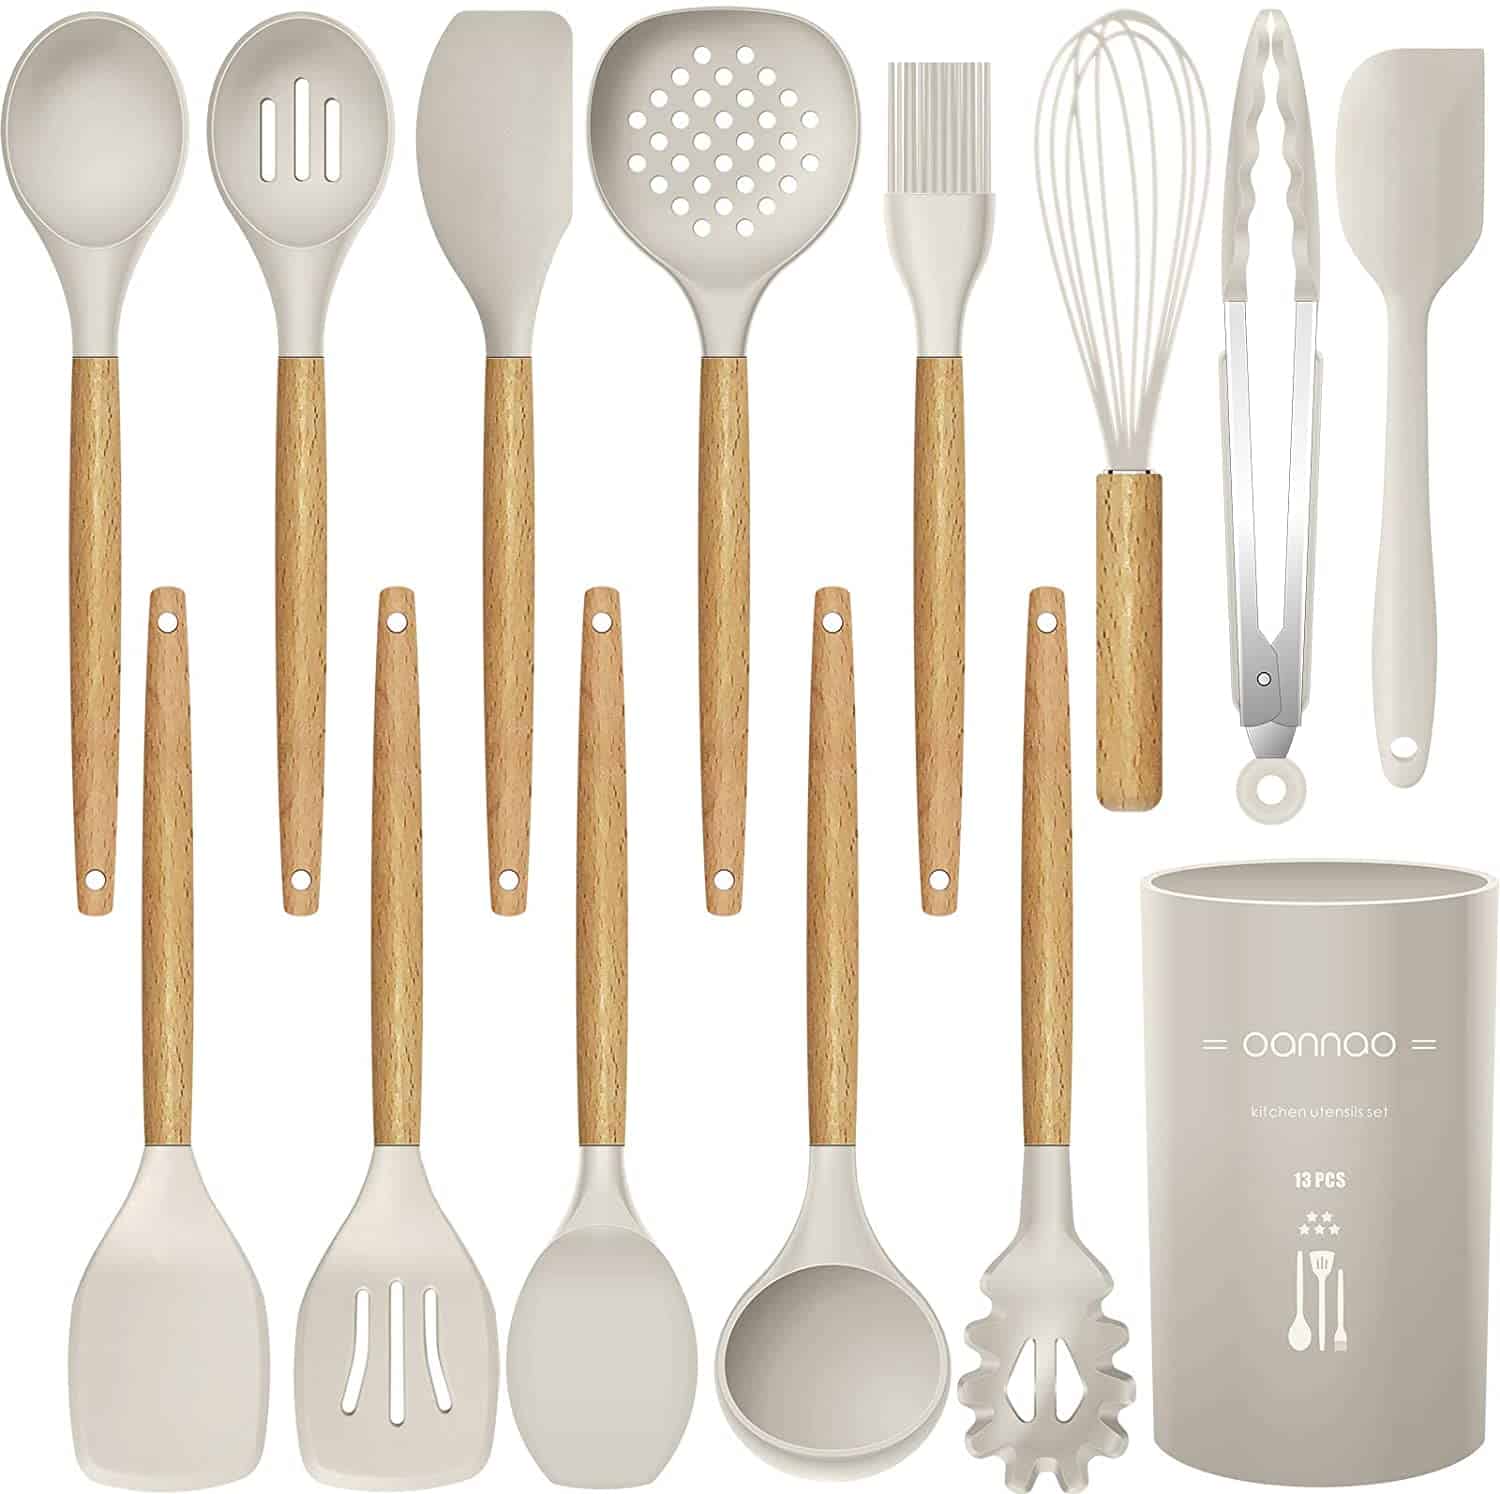 Amazon: 14 Pcs Silicone Cooking Utensils Kitchen Utensil Set ONLY $27 Shipped